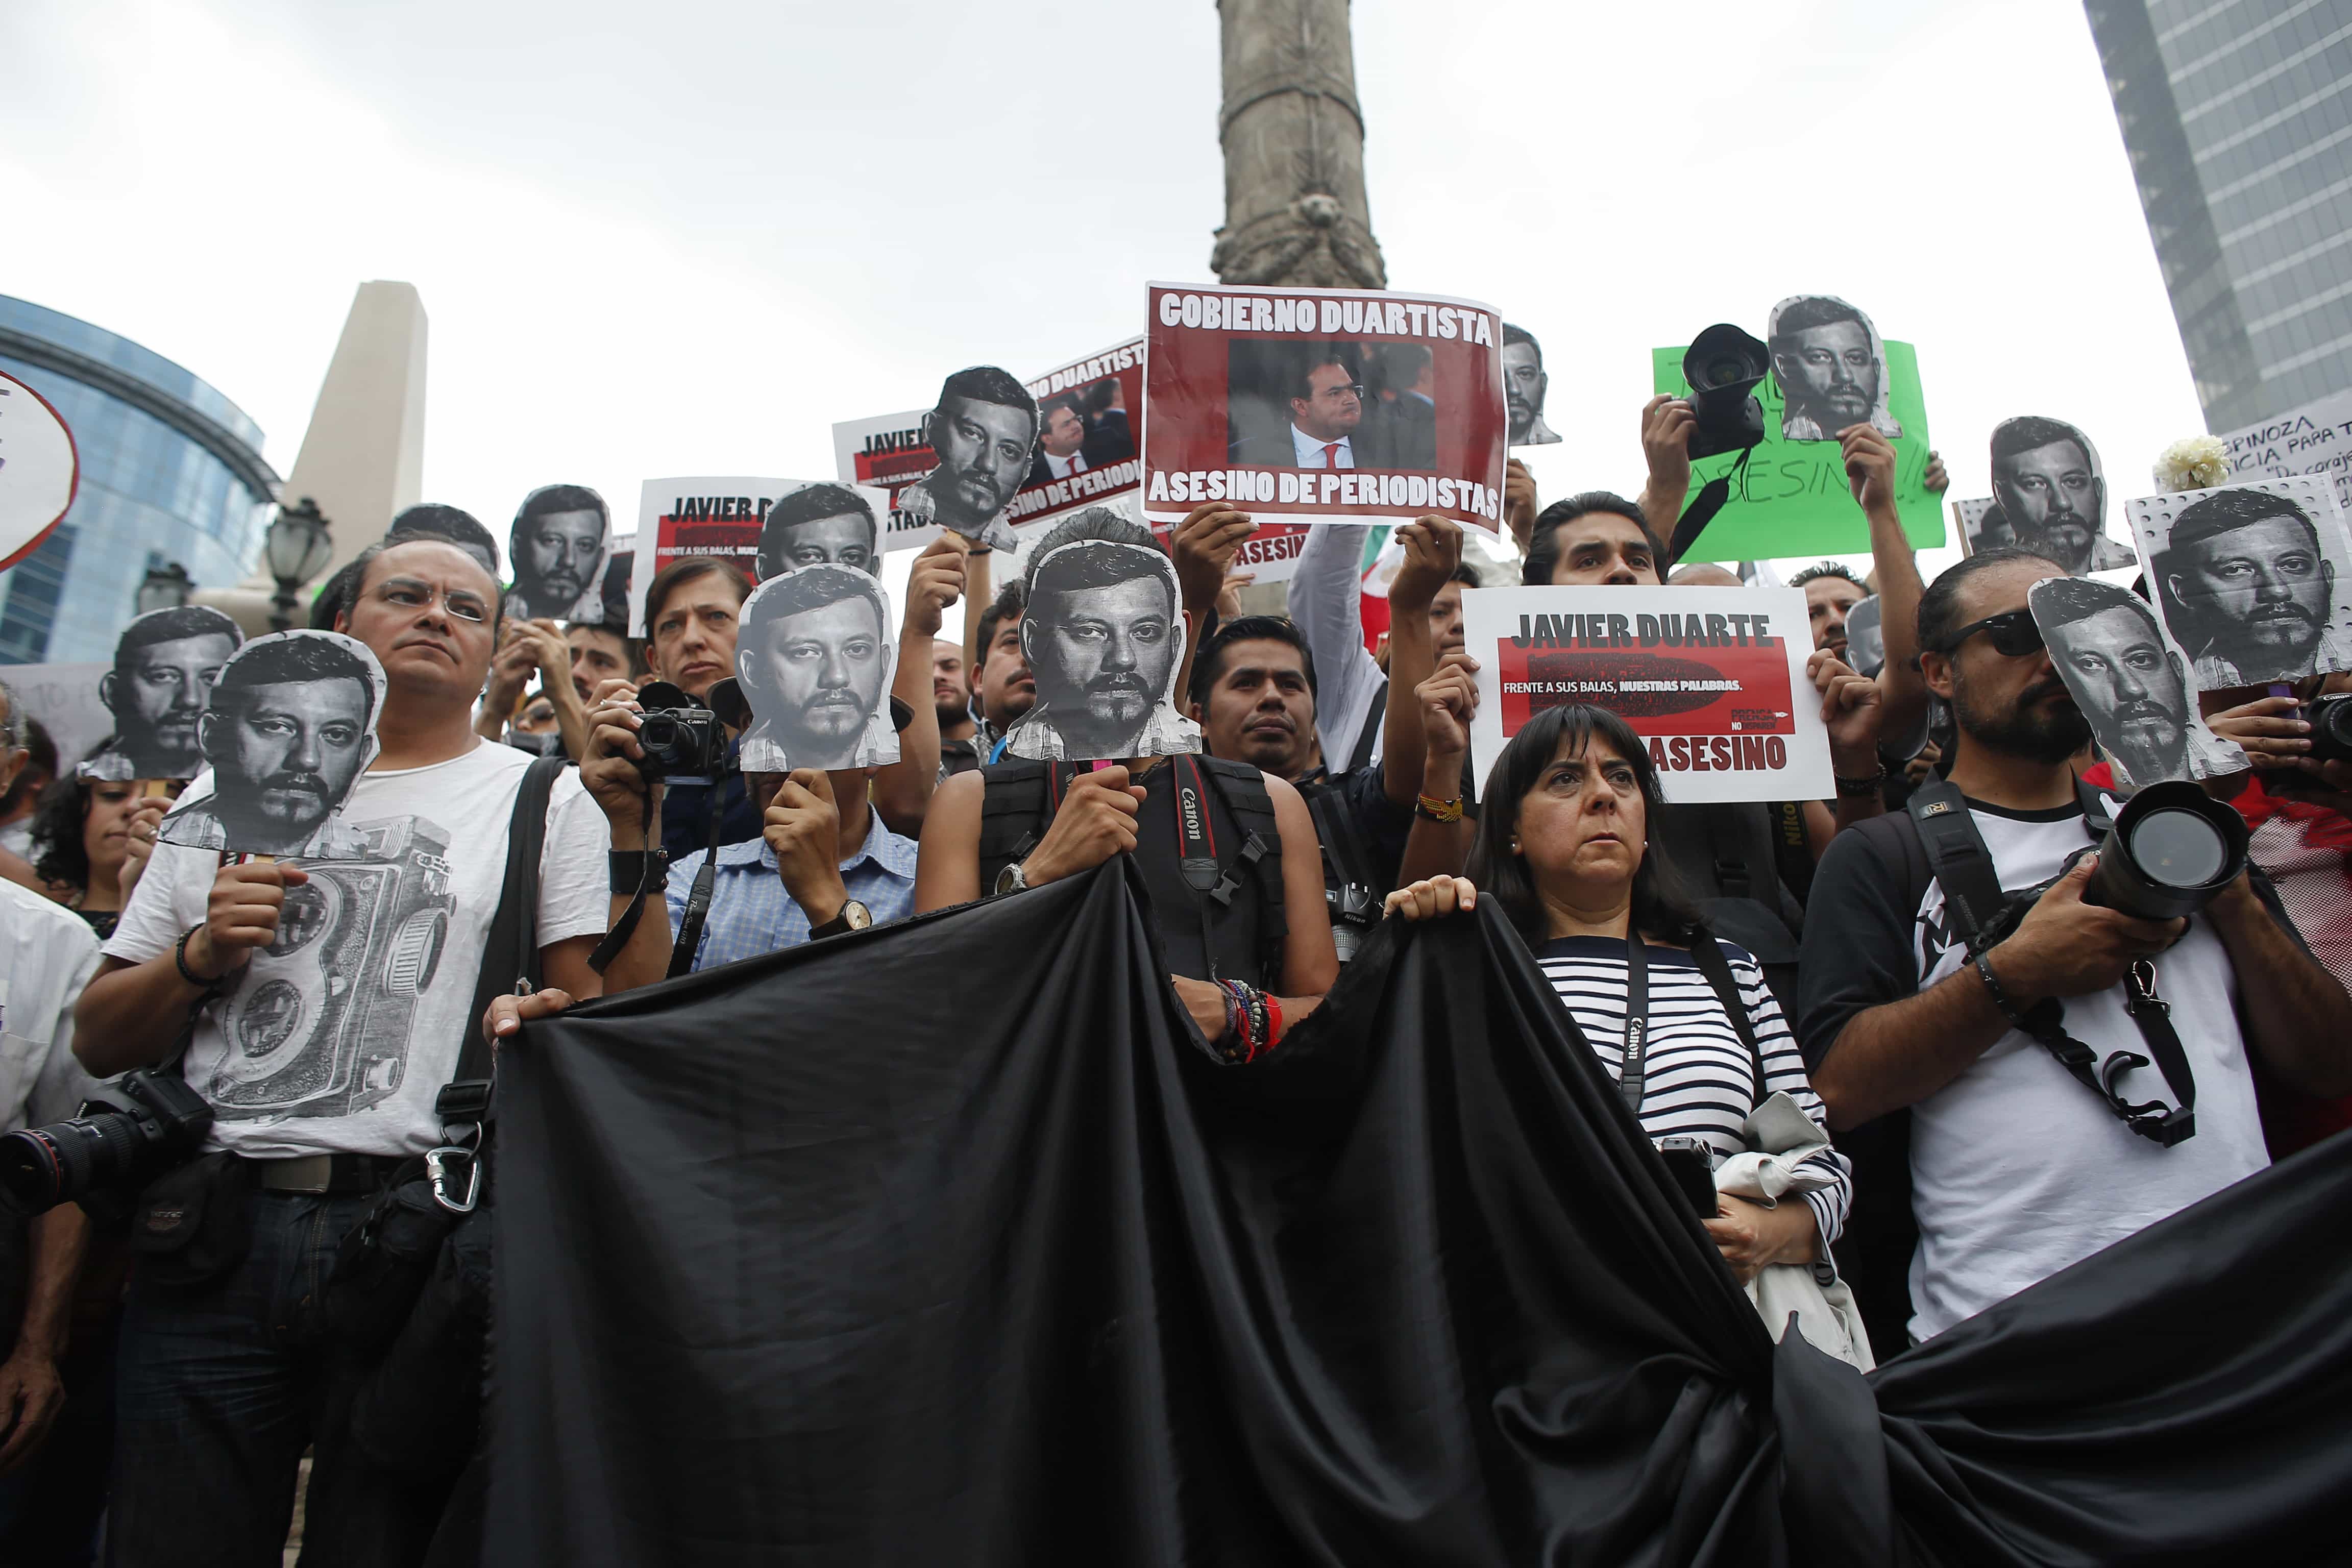 Journalists and activists hold up cut-out images of slain photojournalist during a protest in Mexico City, 2 August 2015, AP Photo/Dario Lopez-Mills